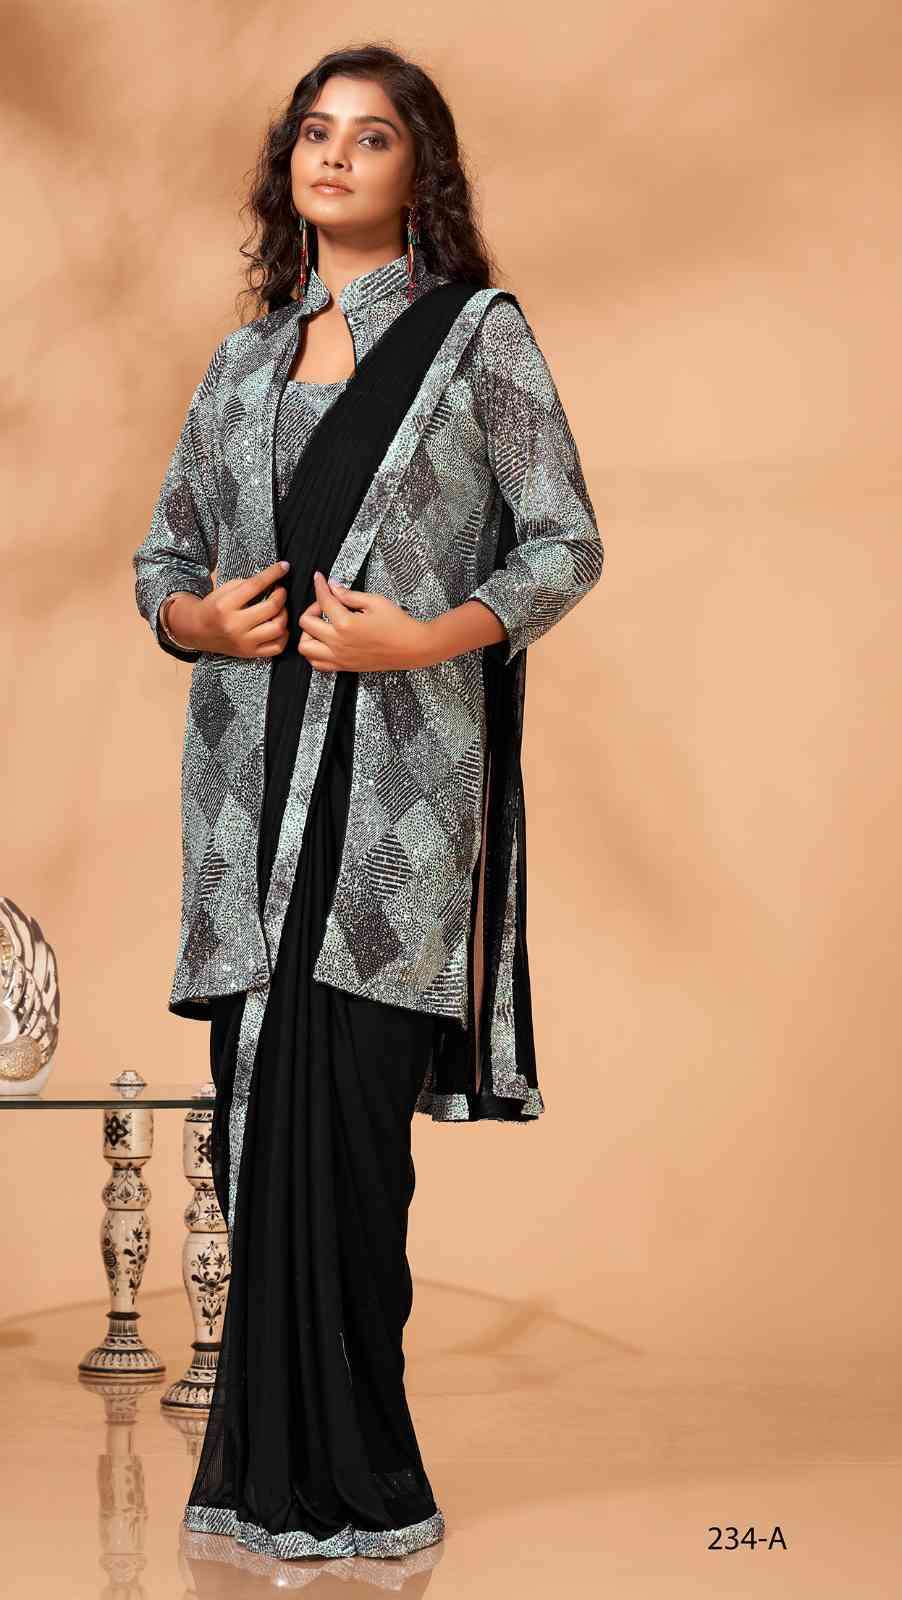 Amoha Trends 234 Party Wear Jacket Style Pre Stitched Saree Collection Supplier